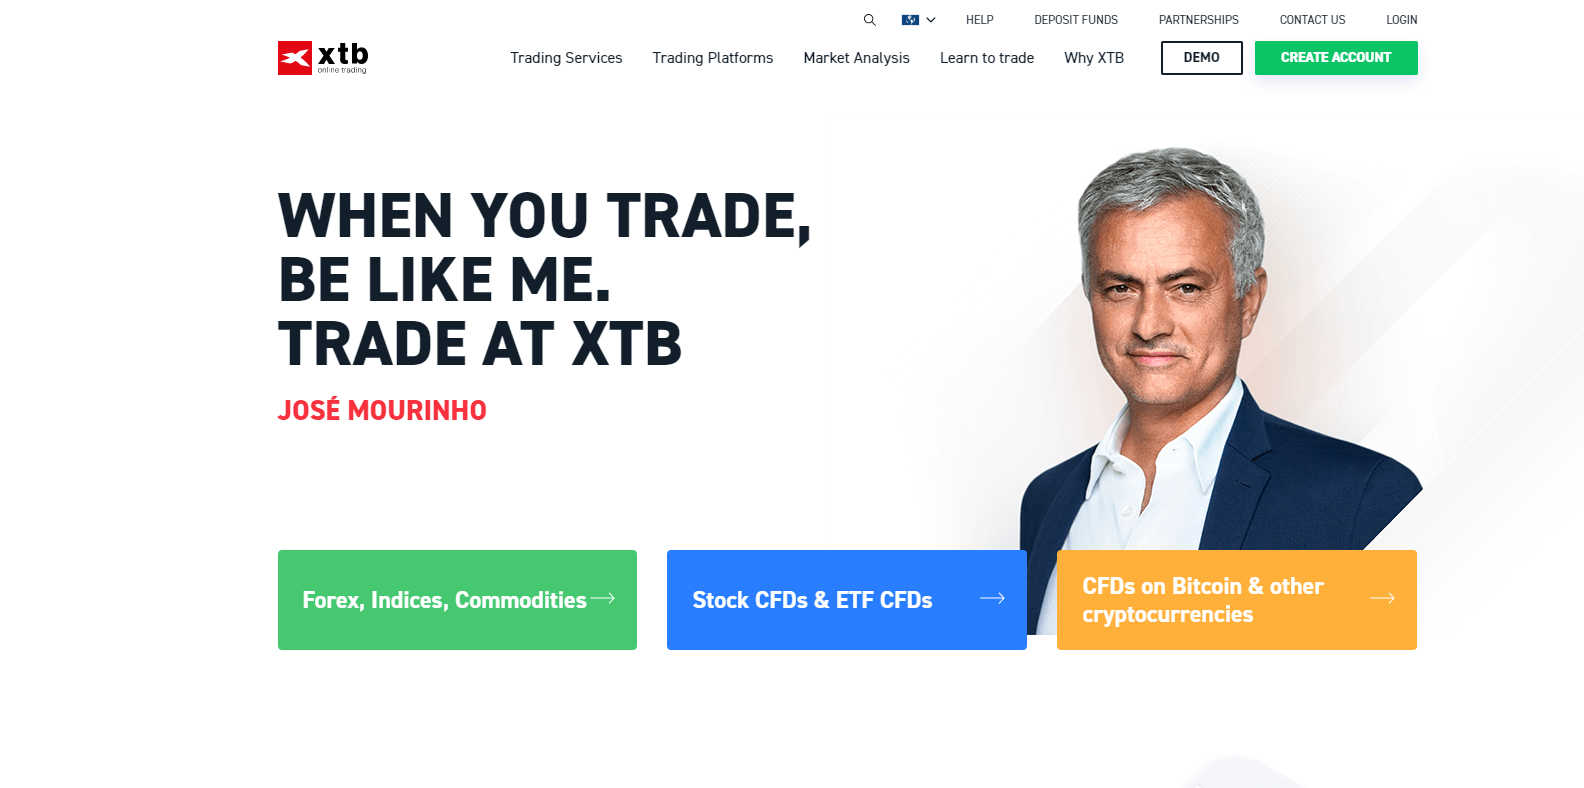 The official website of the forex broker XTB